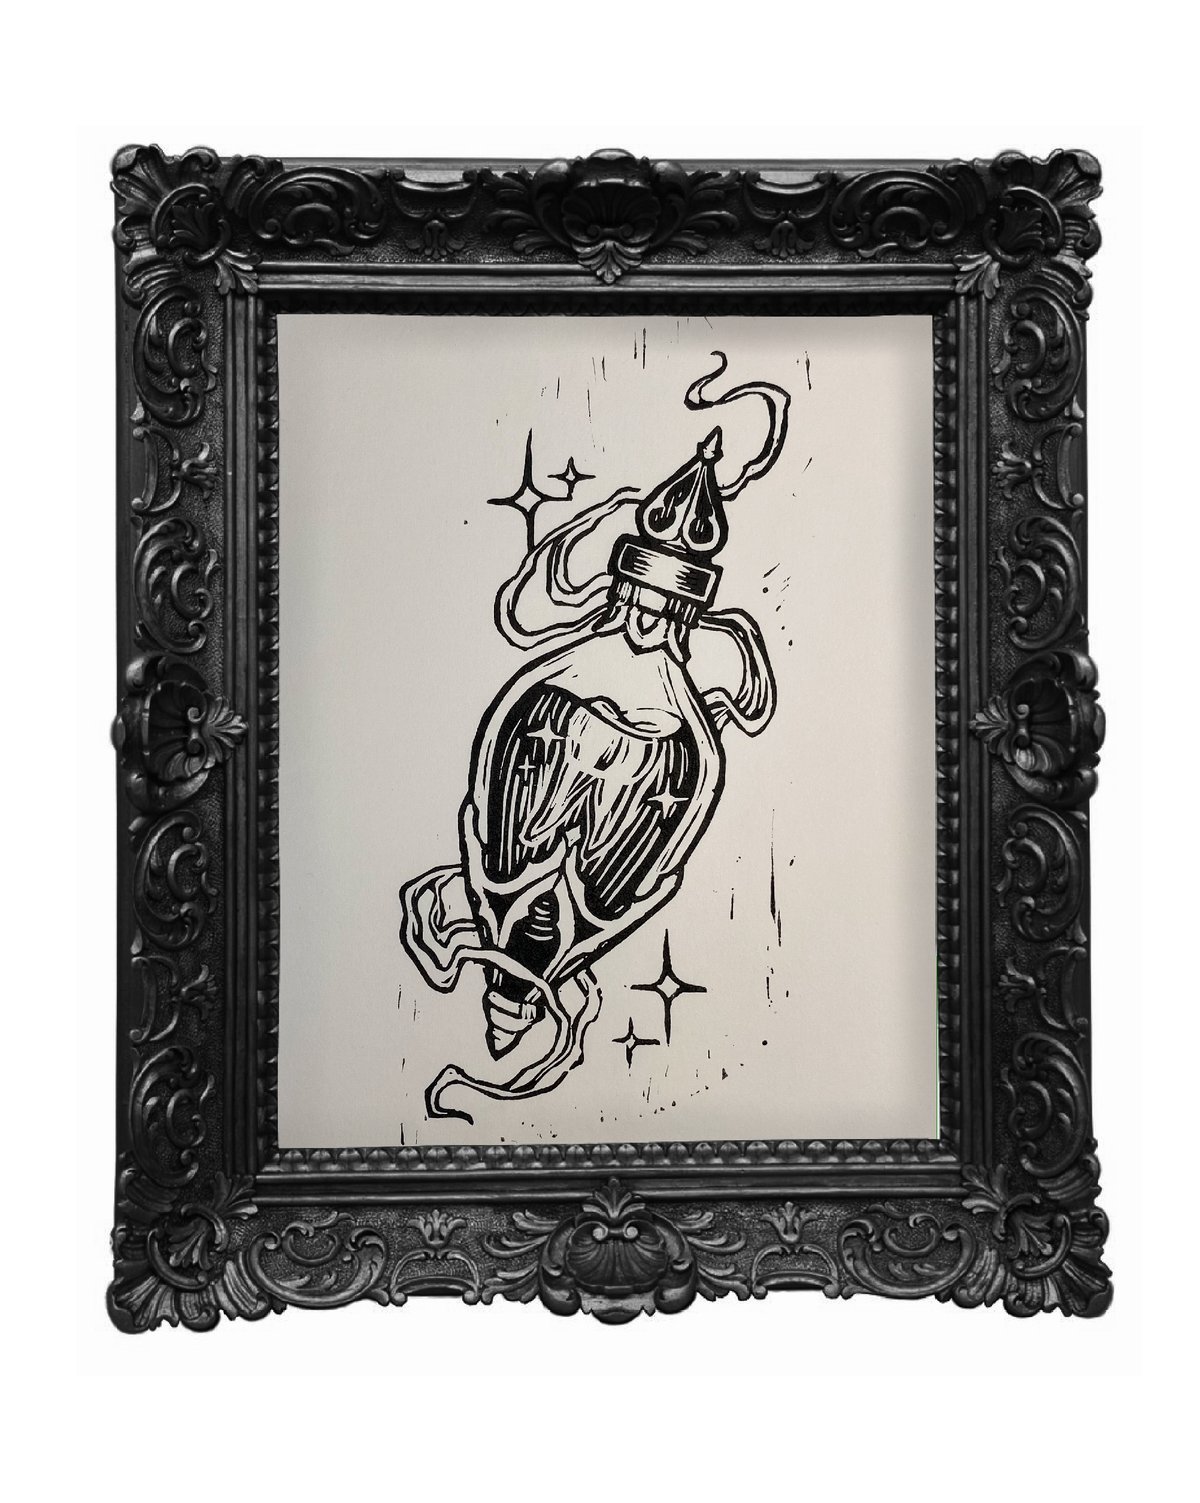 TOOTH POTION - RELIEF PRINT LIMITED EDITION